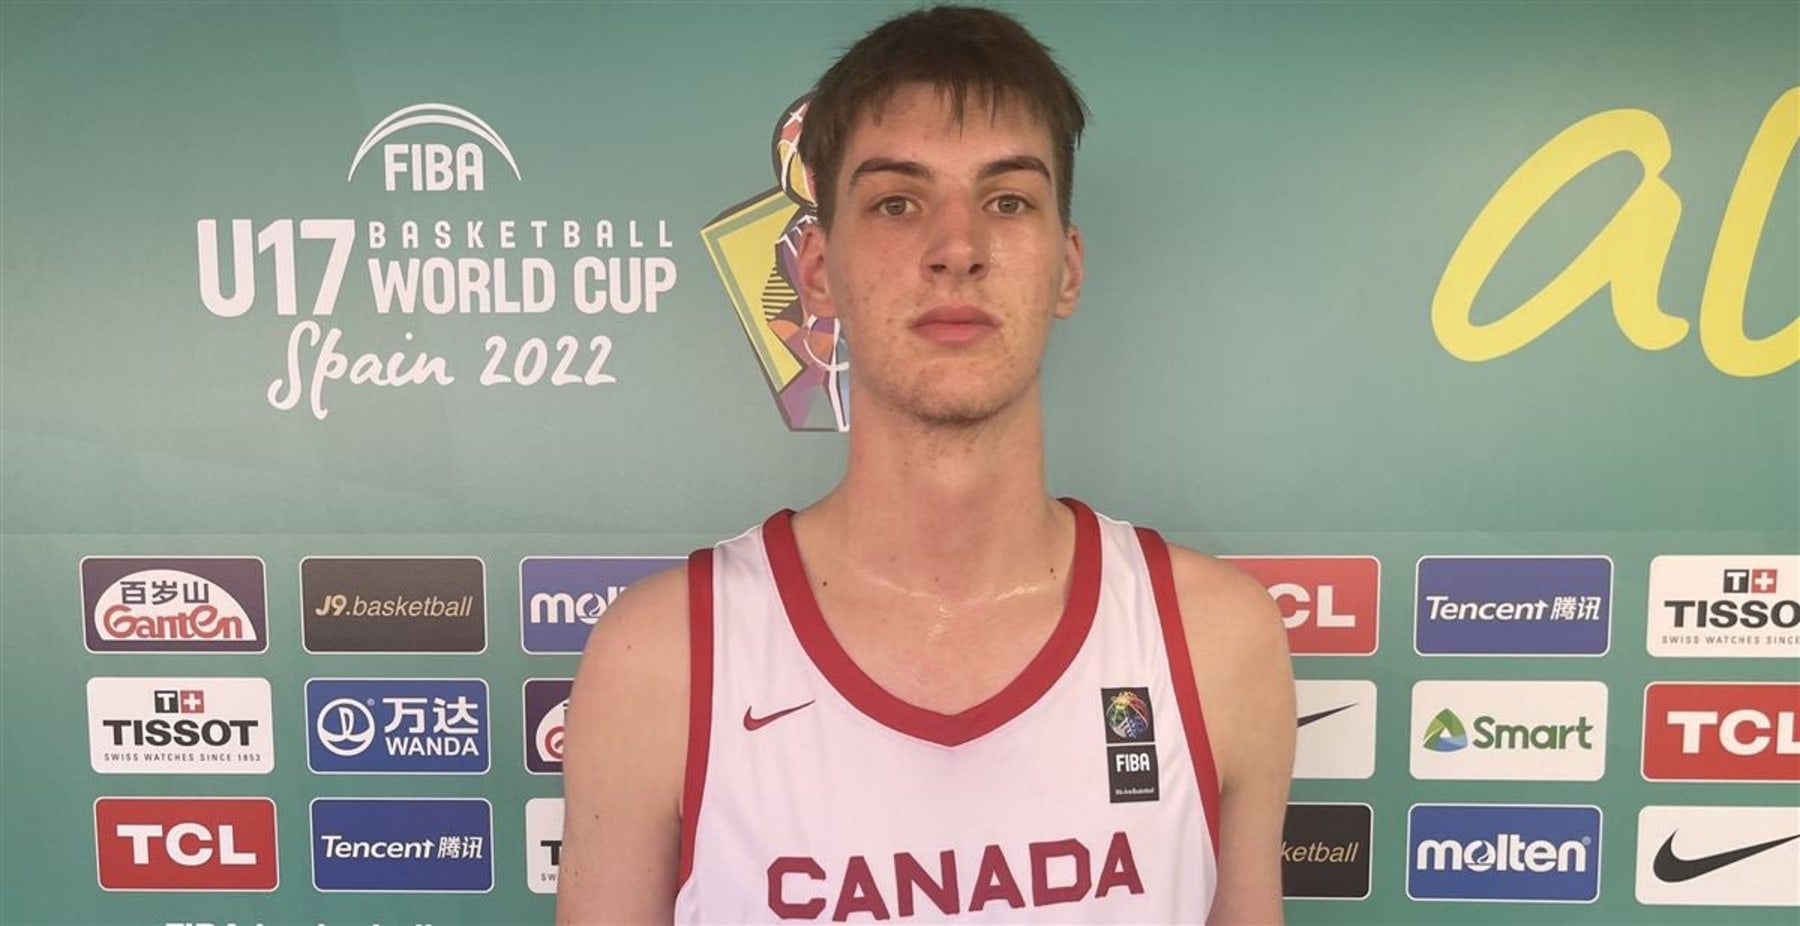 Olivier Rioux Breaks World Record as Tallest Teenager at 7’9″ and Commits to Florida CBB